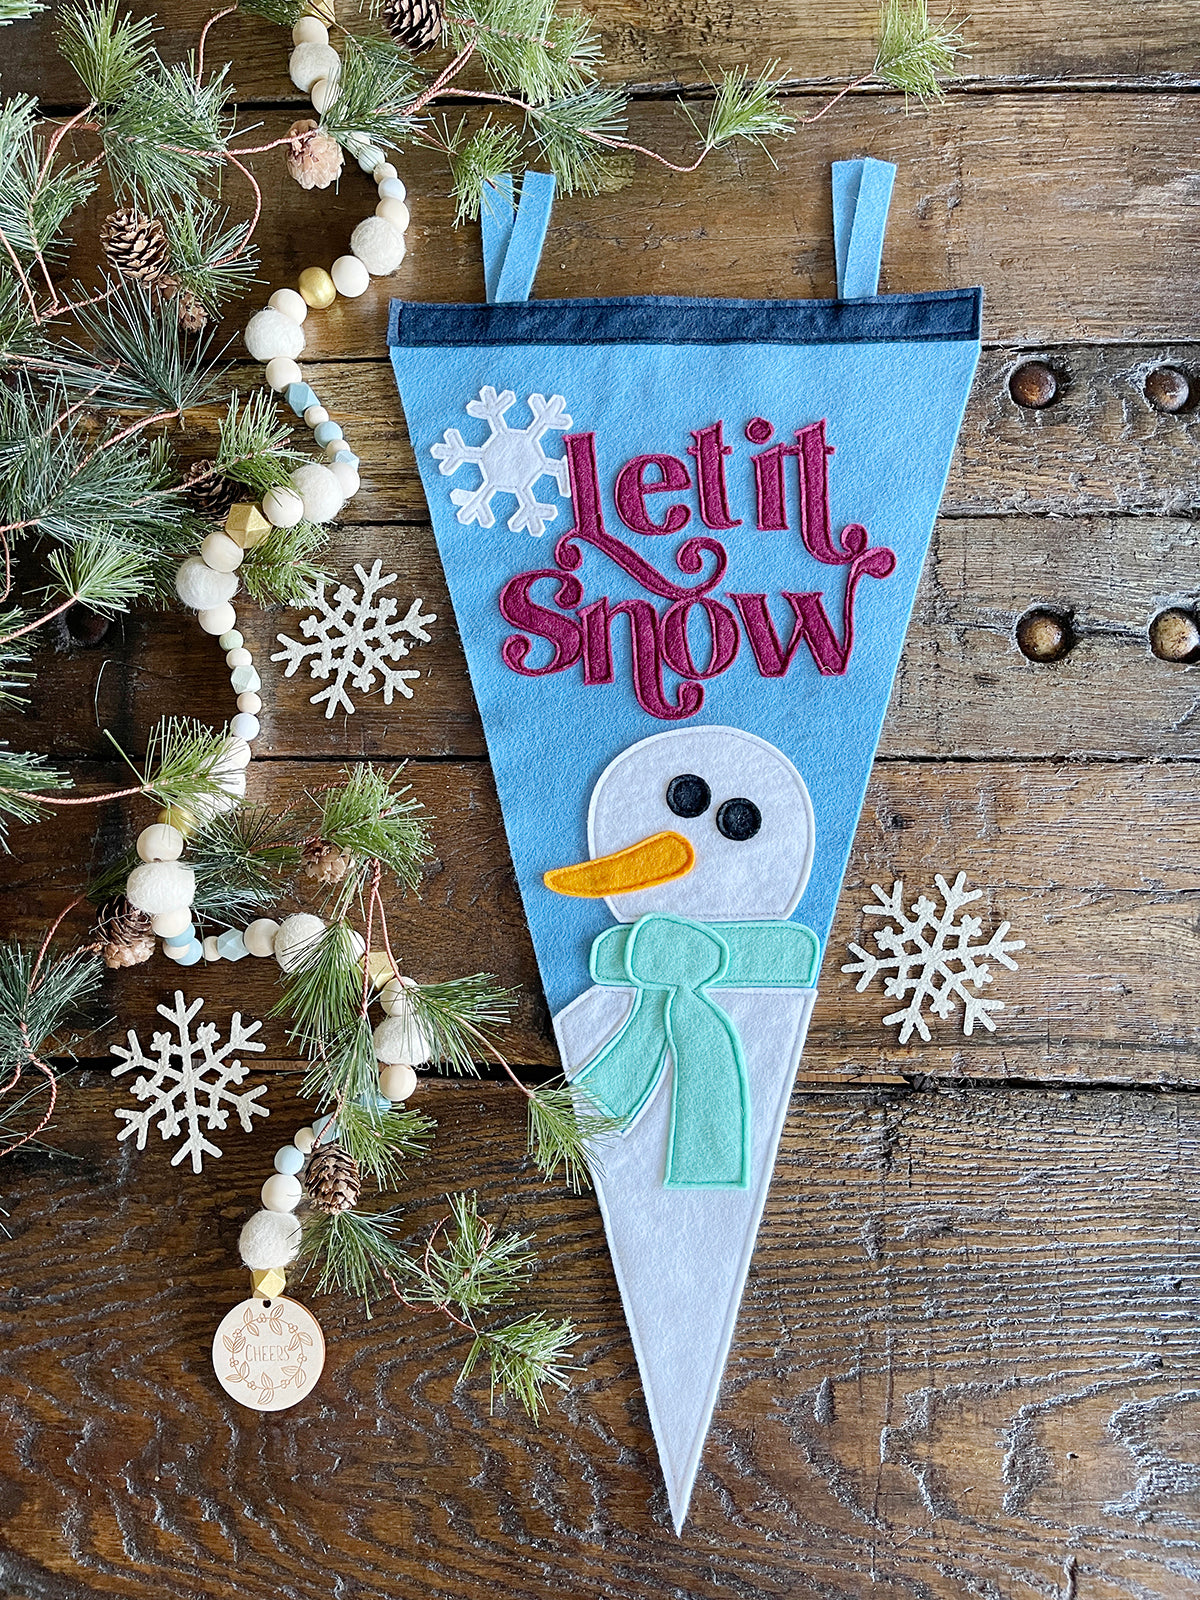 Bird's eye view of a Light Blue felt pennant with red lettering spelling 'Let it snow' and a white snowman with a mint scarf at the bottom. A garland of felt balls and wood beads in neutral colors is laid on pine boughs in the left of the photo.